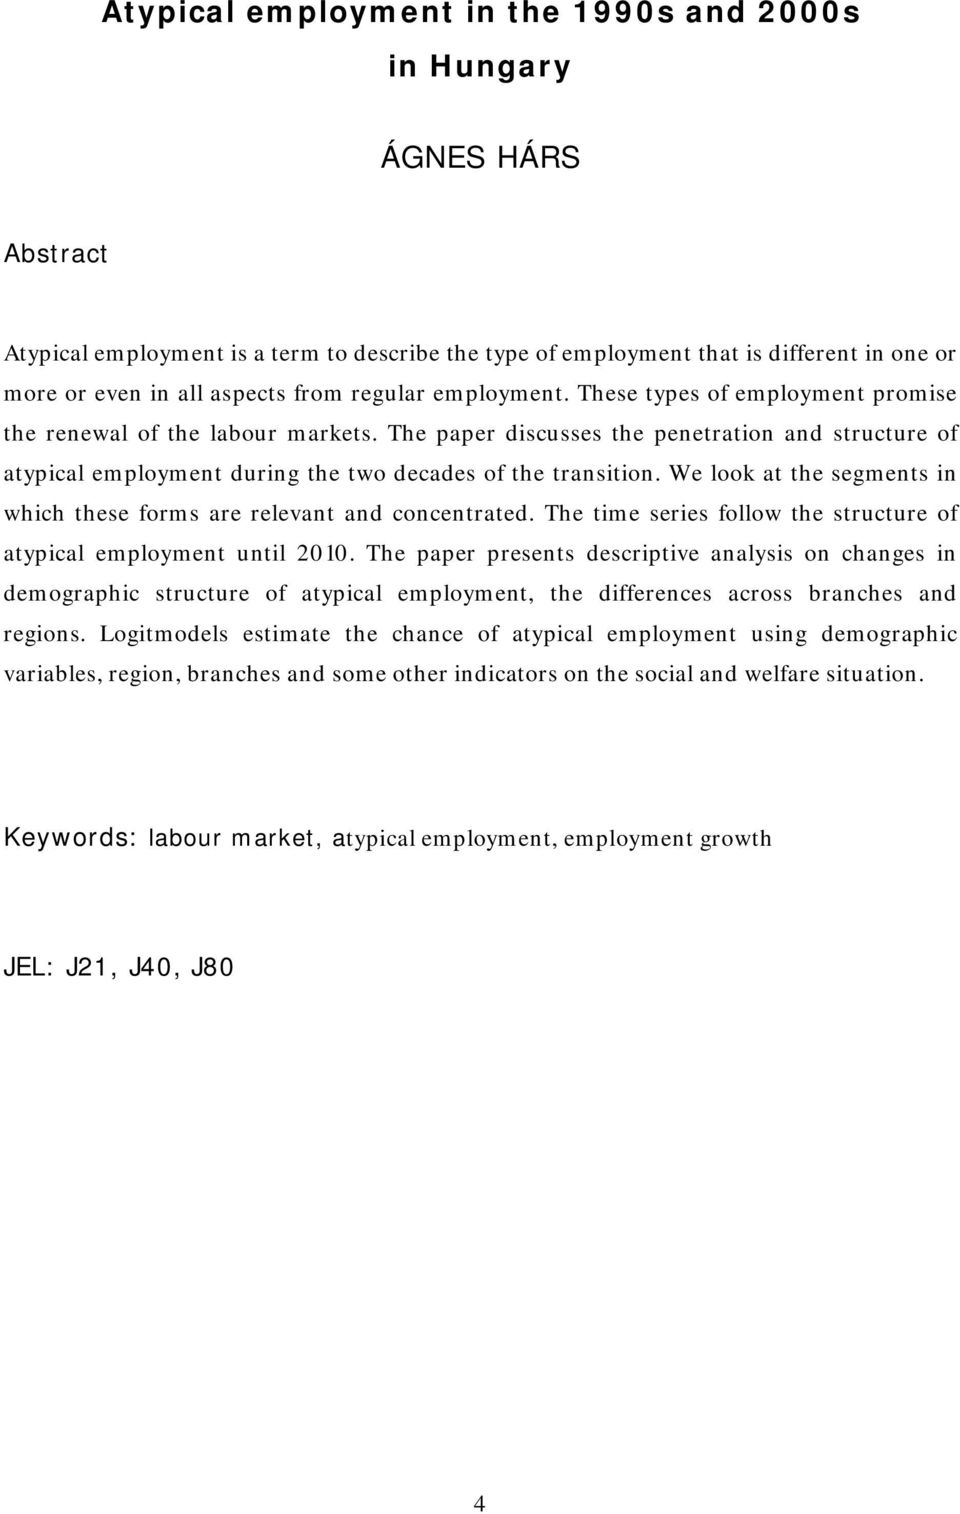 The paper discusses the penetration and structure of atypical employment during the two decades of the transition. We look at the segments in which these forms are relevant and concentrated.